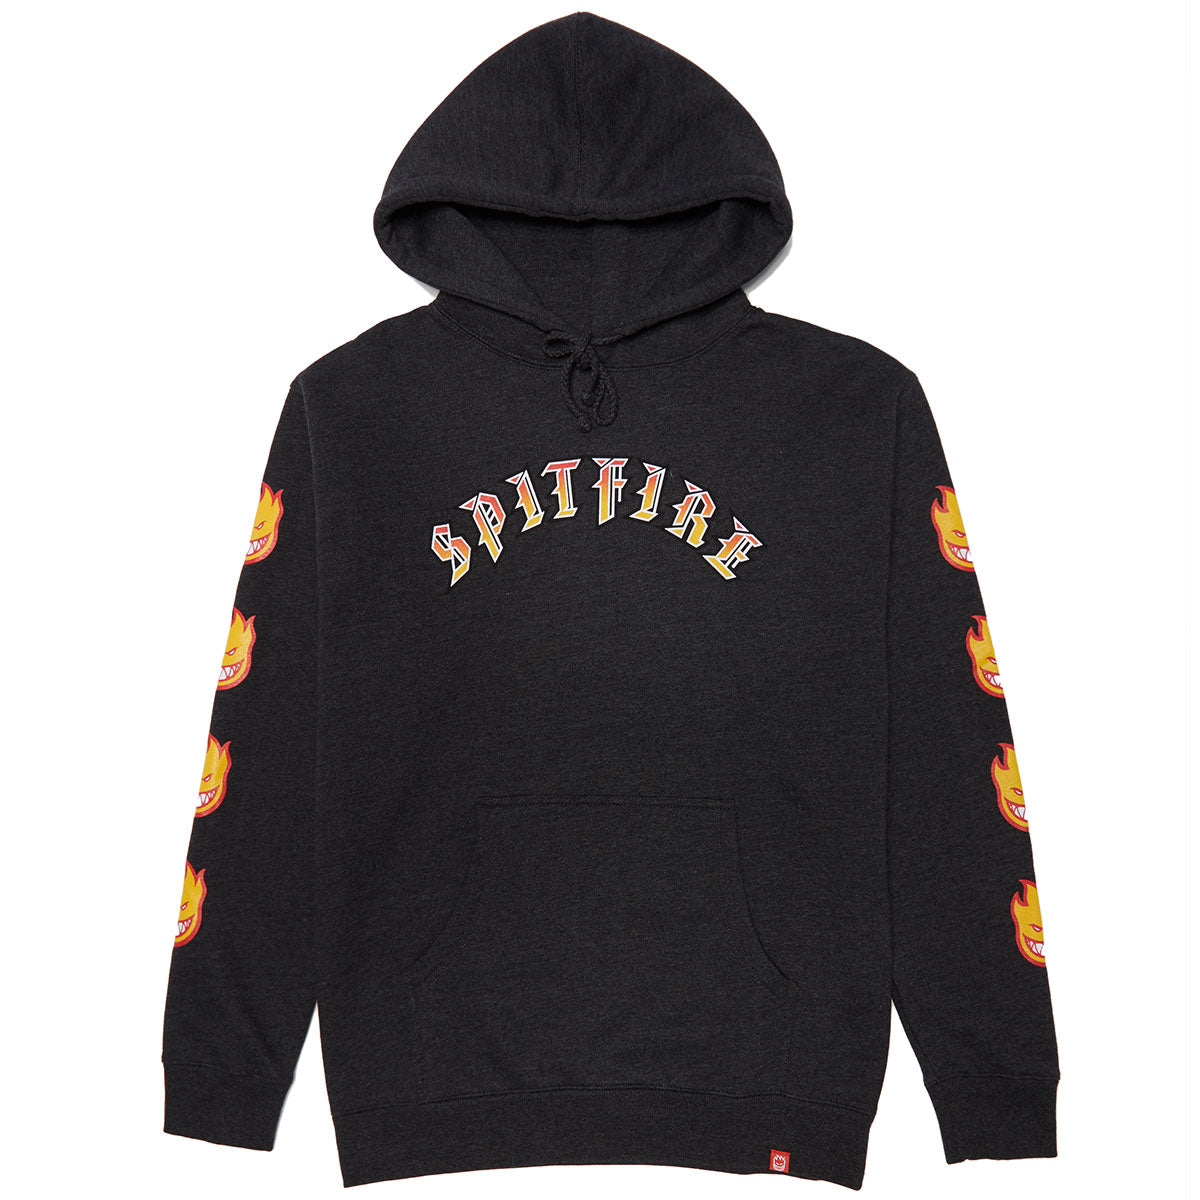 Spitfire Old E Bighead Fill Sleeve Hoodie - Charcoal Heather/Gold/Red image 1